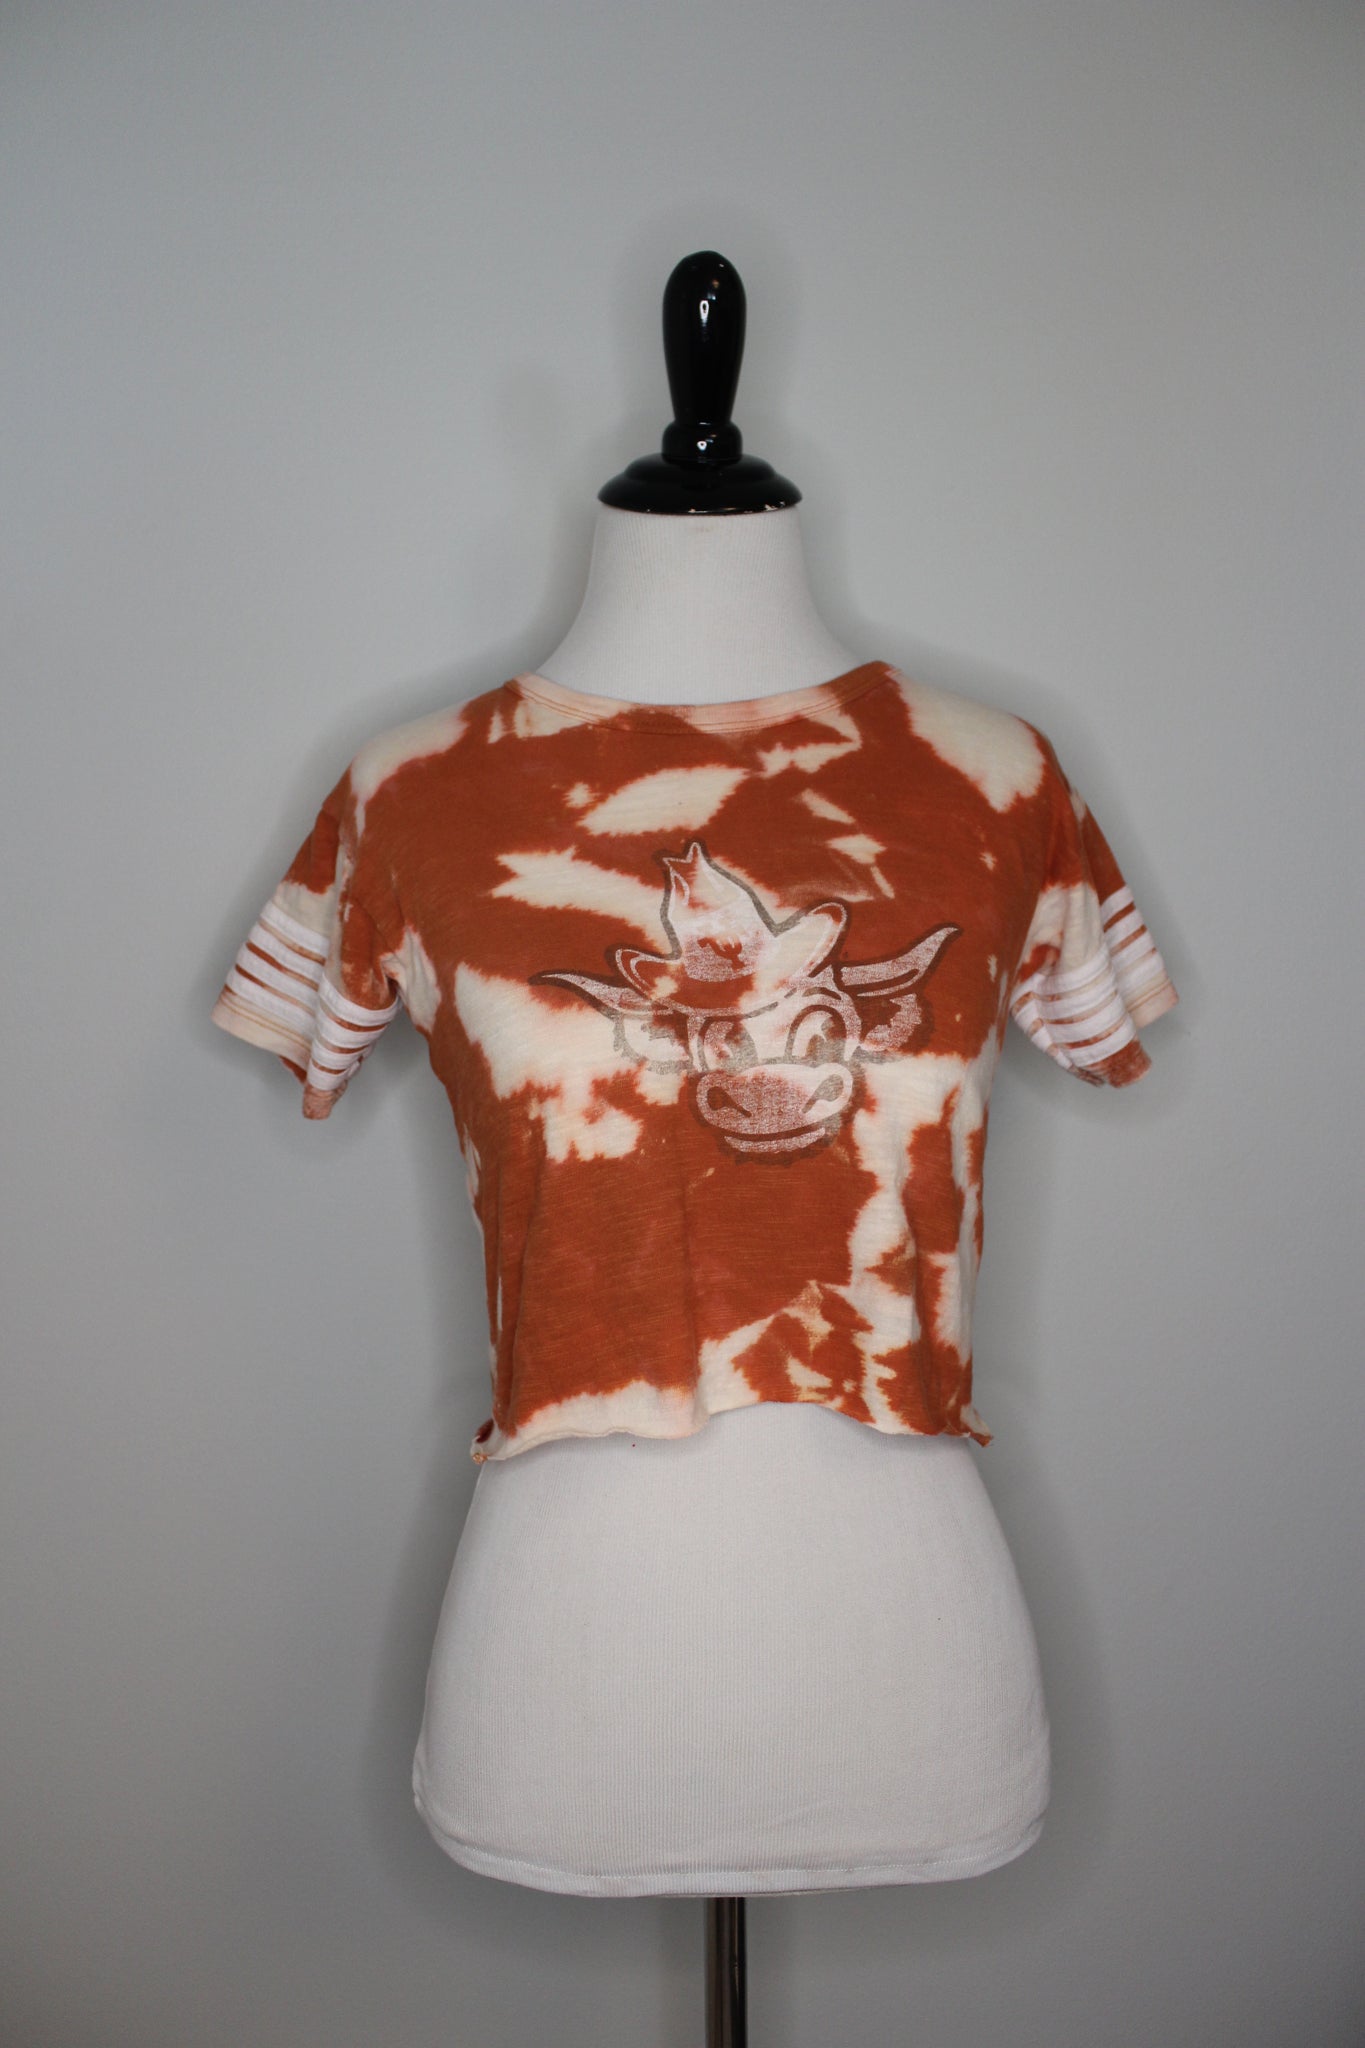 Texas Bleached and Cropped Shirt